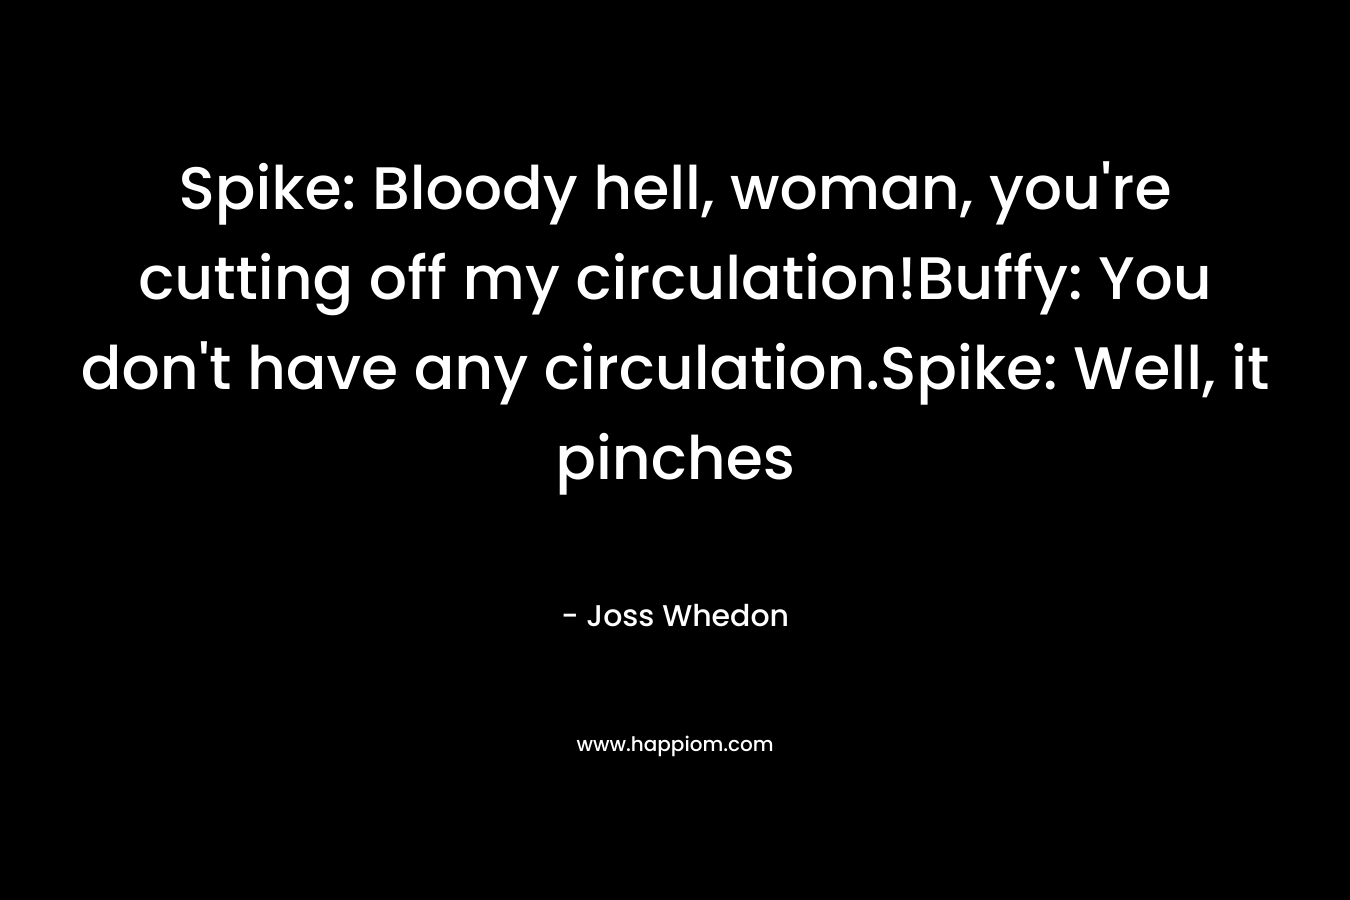 Spike: Bloody hell, woman, you're cutting off my circulation!Buffy: You don't have any circulation.Spike: Well, it pinches